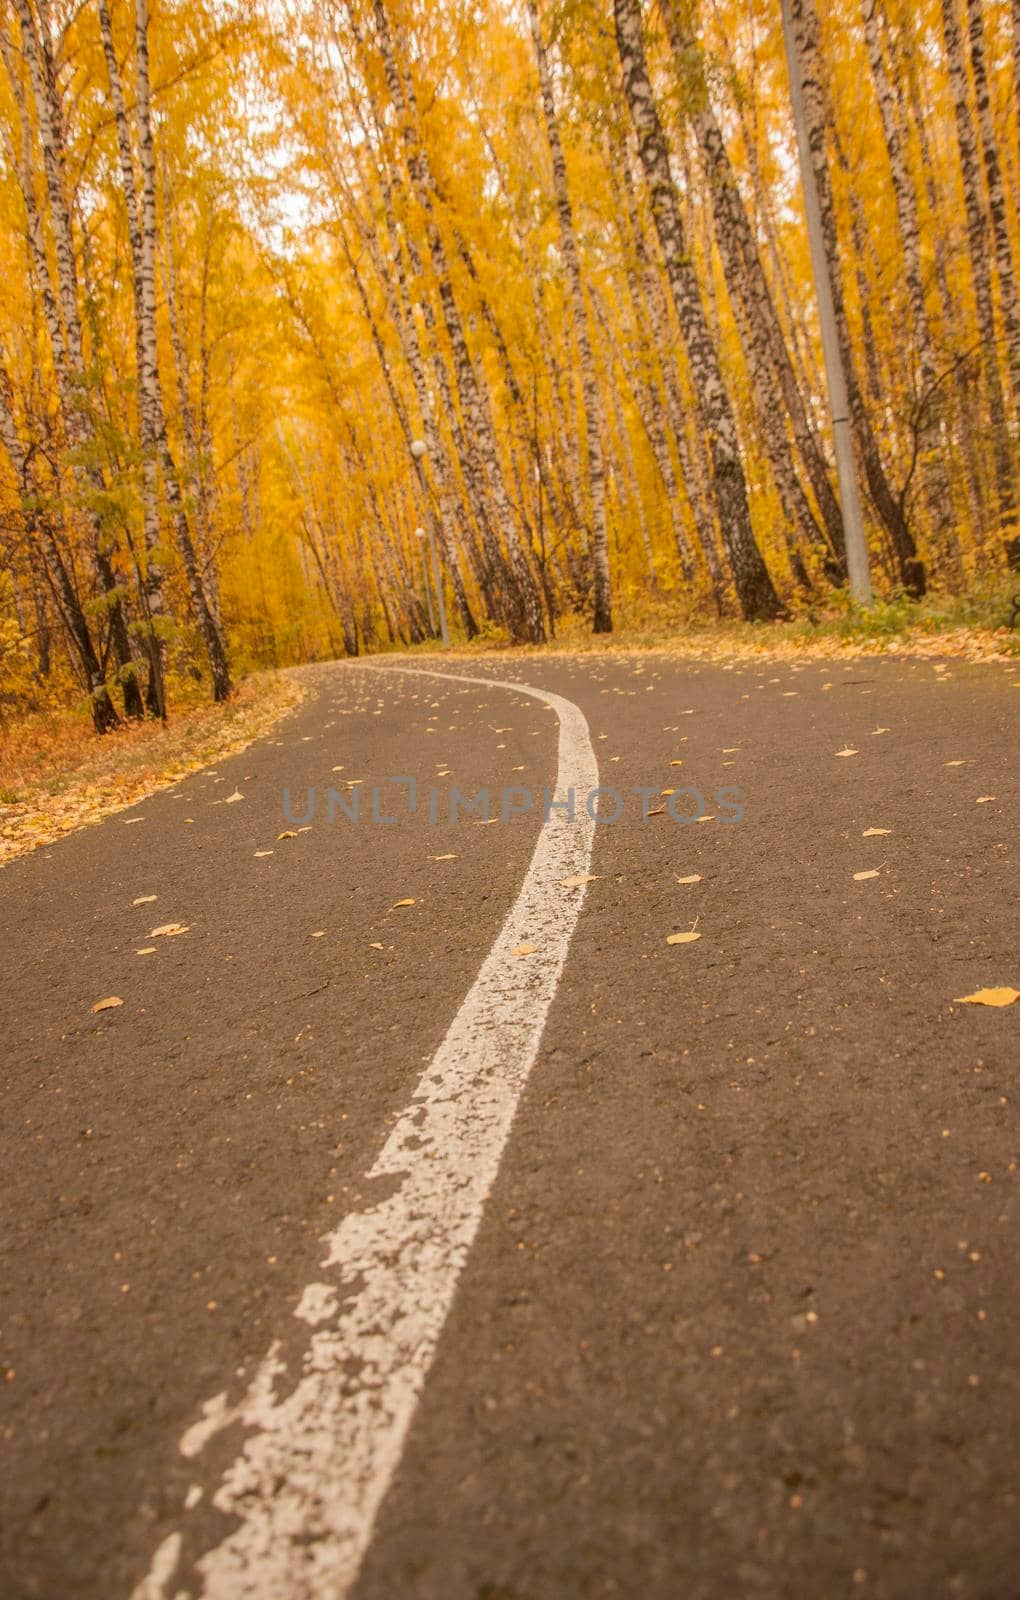 asphalt road with beautiful trees on the sides in autumn by inxti